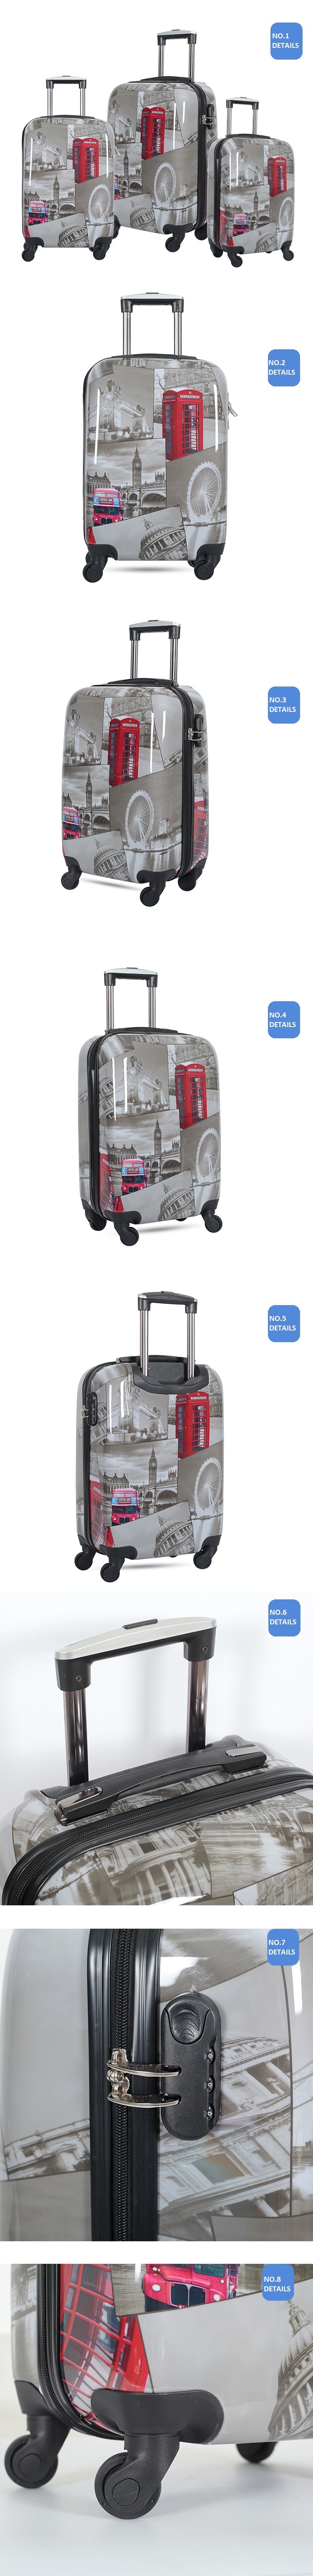 Hot New OEM Print Suitcase Trolley Case ABS/PC Printed Trolley Travel Spinner Luggage Bag